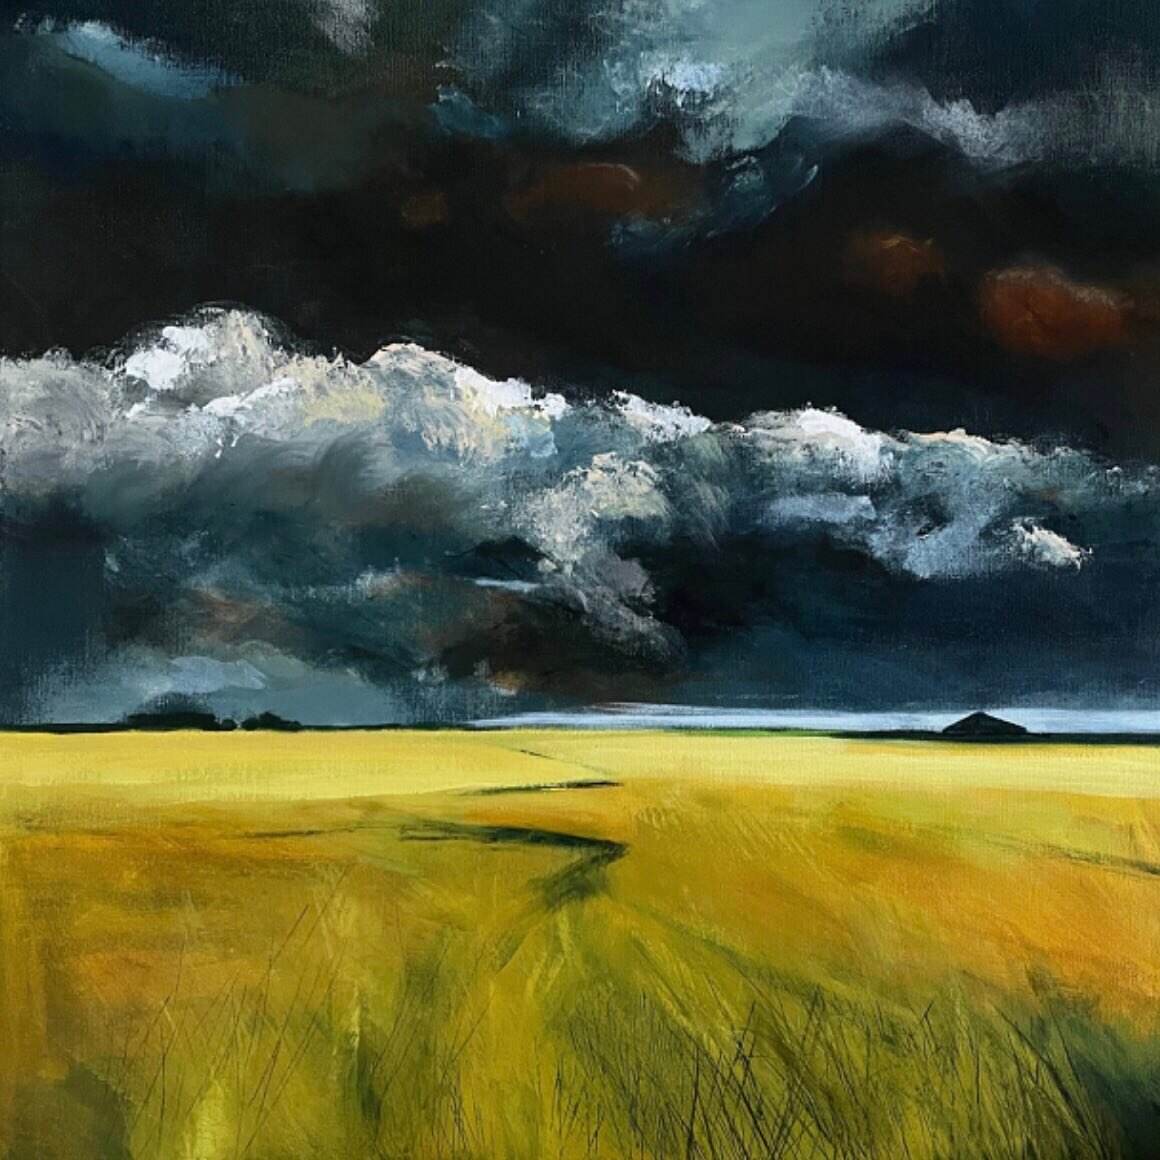 KIRSTEN ELSWOOD
Kirsten is a landscape painter, who tries to capture the 'peace of the wild'. She is primarily concerned with light and atmosphere in landscape.  She studied Fine Art in Exeter and continues her professional practice at Newlyn School 